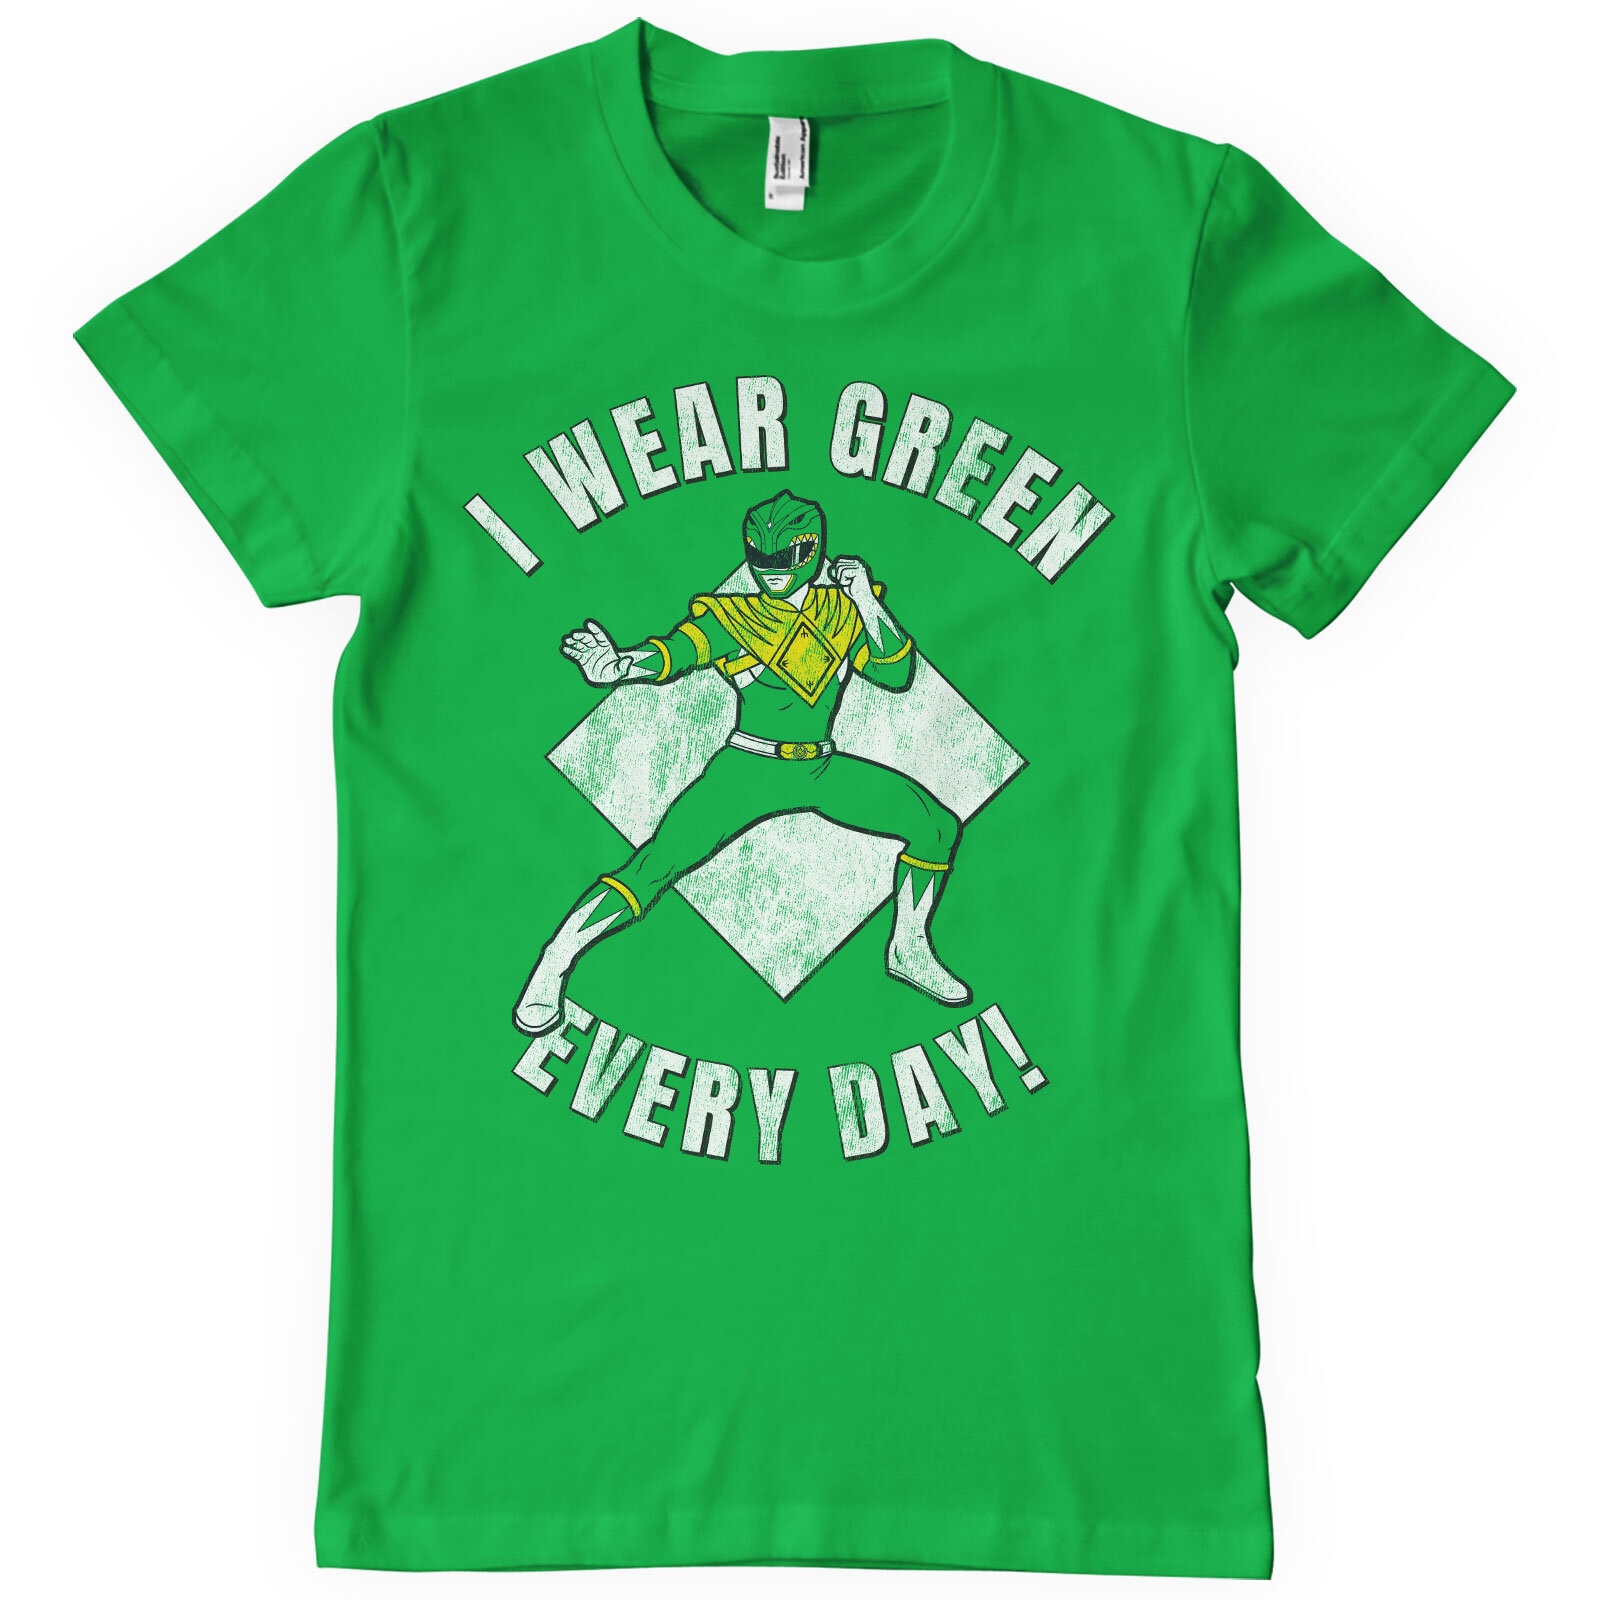 I Wear Green Every Day T-Shirt